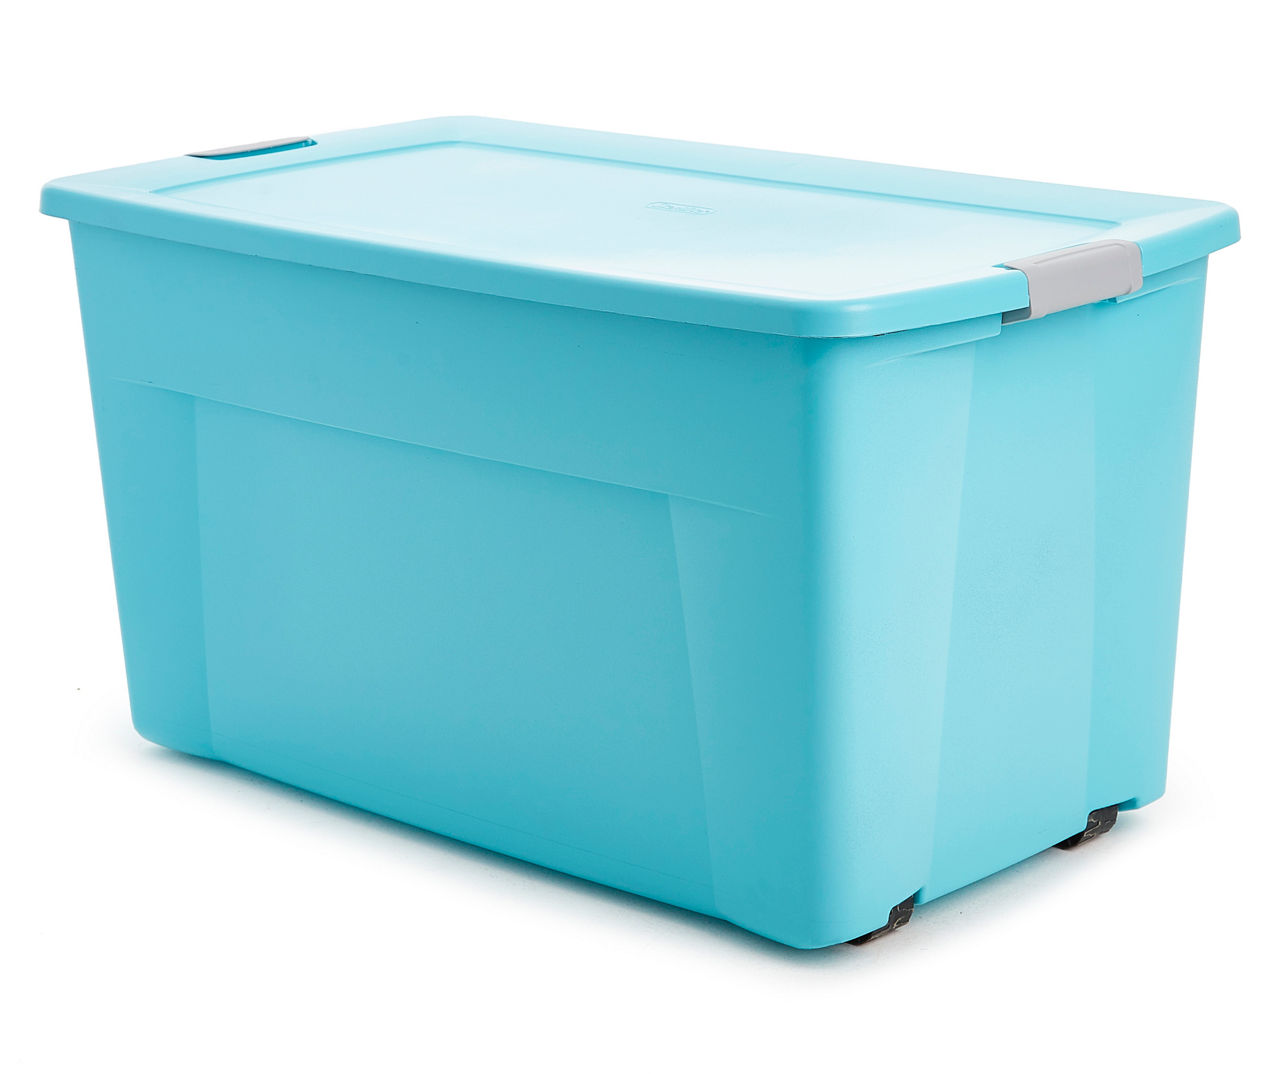 Sterilite 45 Gallon Totes Bins Containers With wheels (no Lids) for